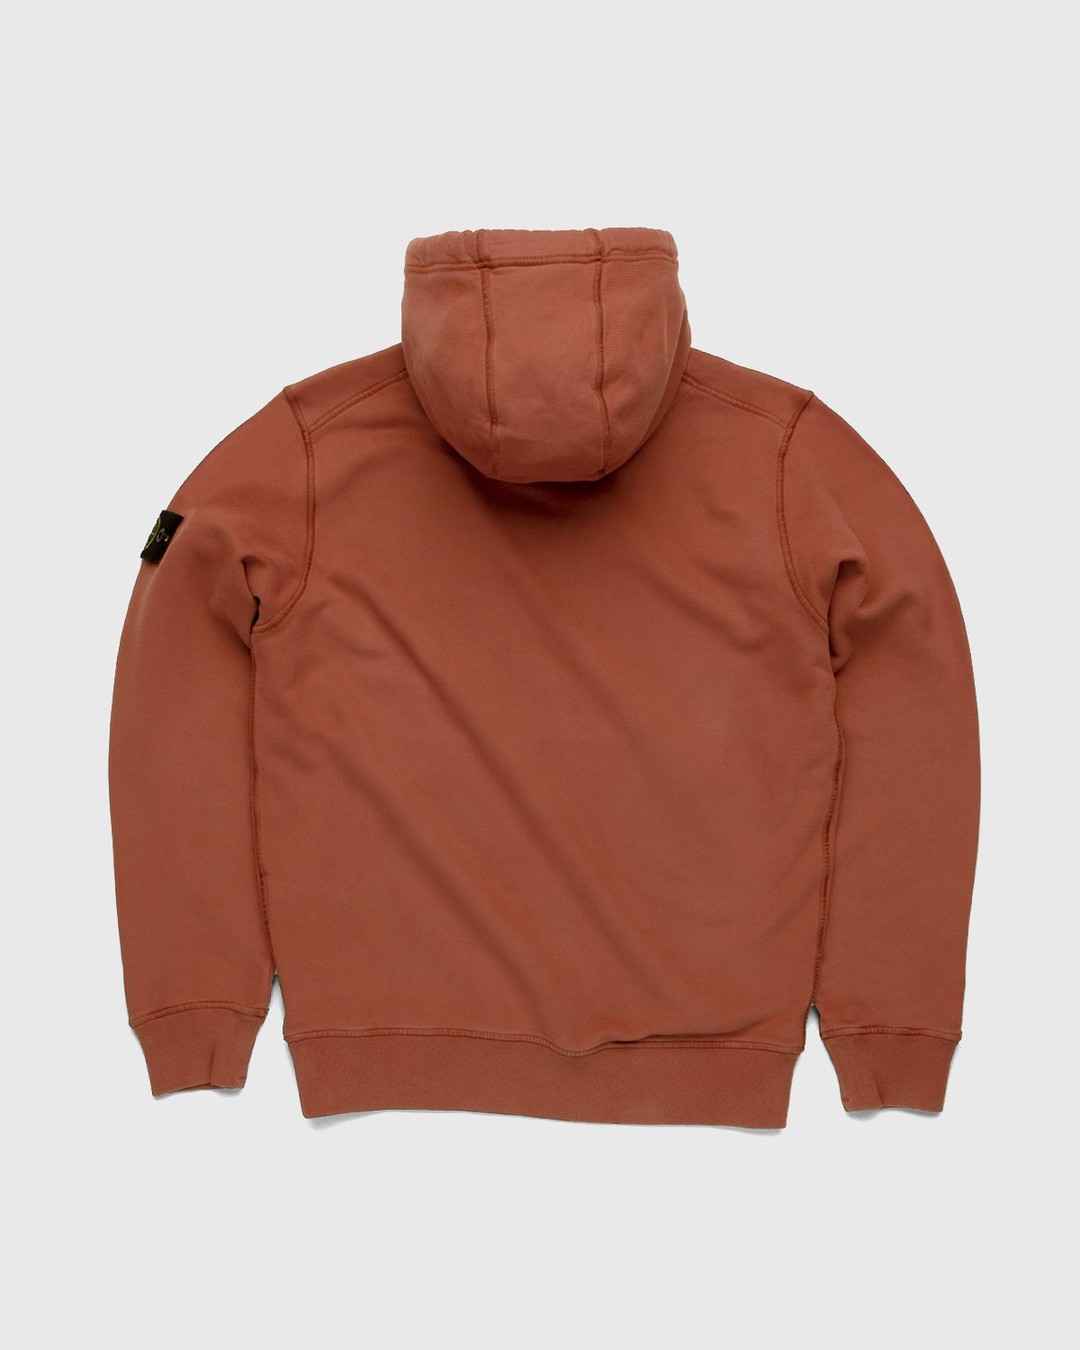 Nest Is Complex Stone Island – Dust Color Treatment Hoodie Brick Red | Highsnobiety Shop